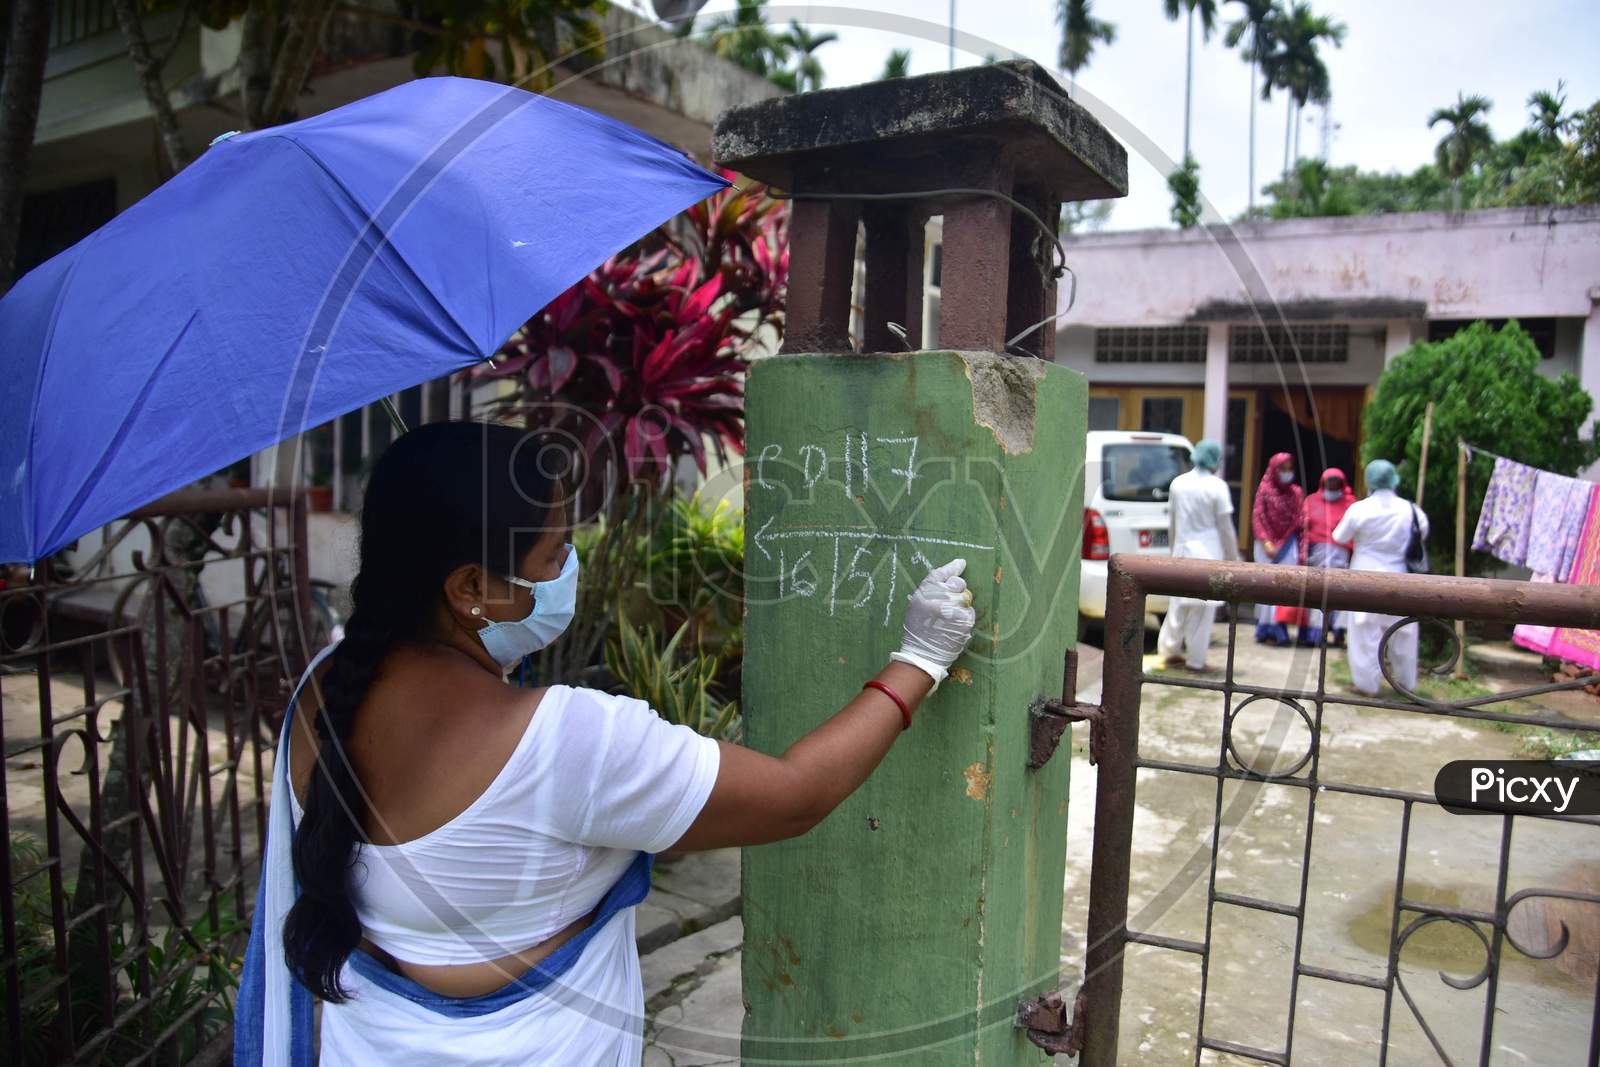 A Health Worker Numbering On A Wall  As They Conduct House To House Health Survey During Nationwide Lockdown Amidst Coronavirus or COVID-19 Pandemic  In Nagaon District Of Assam,India